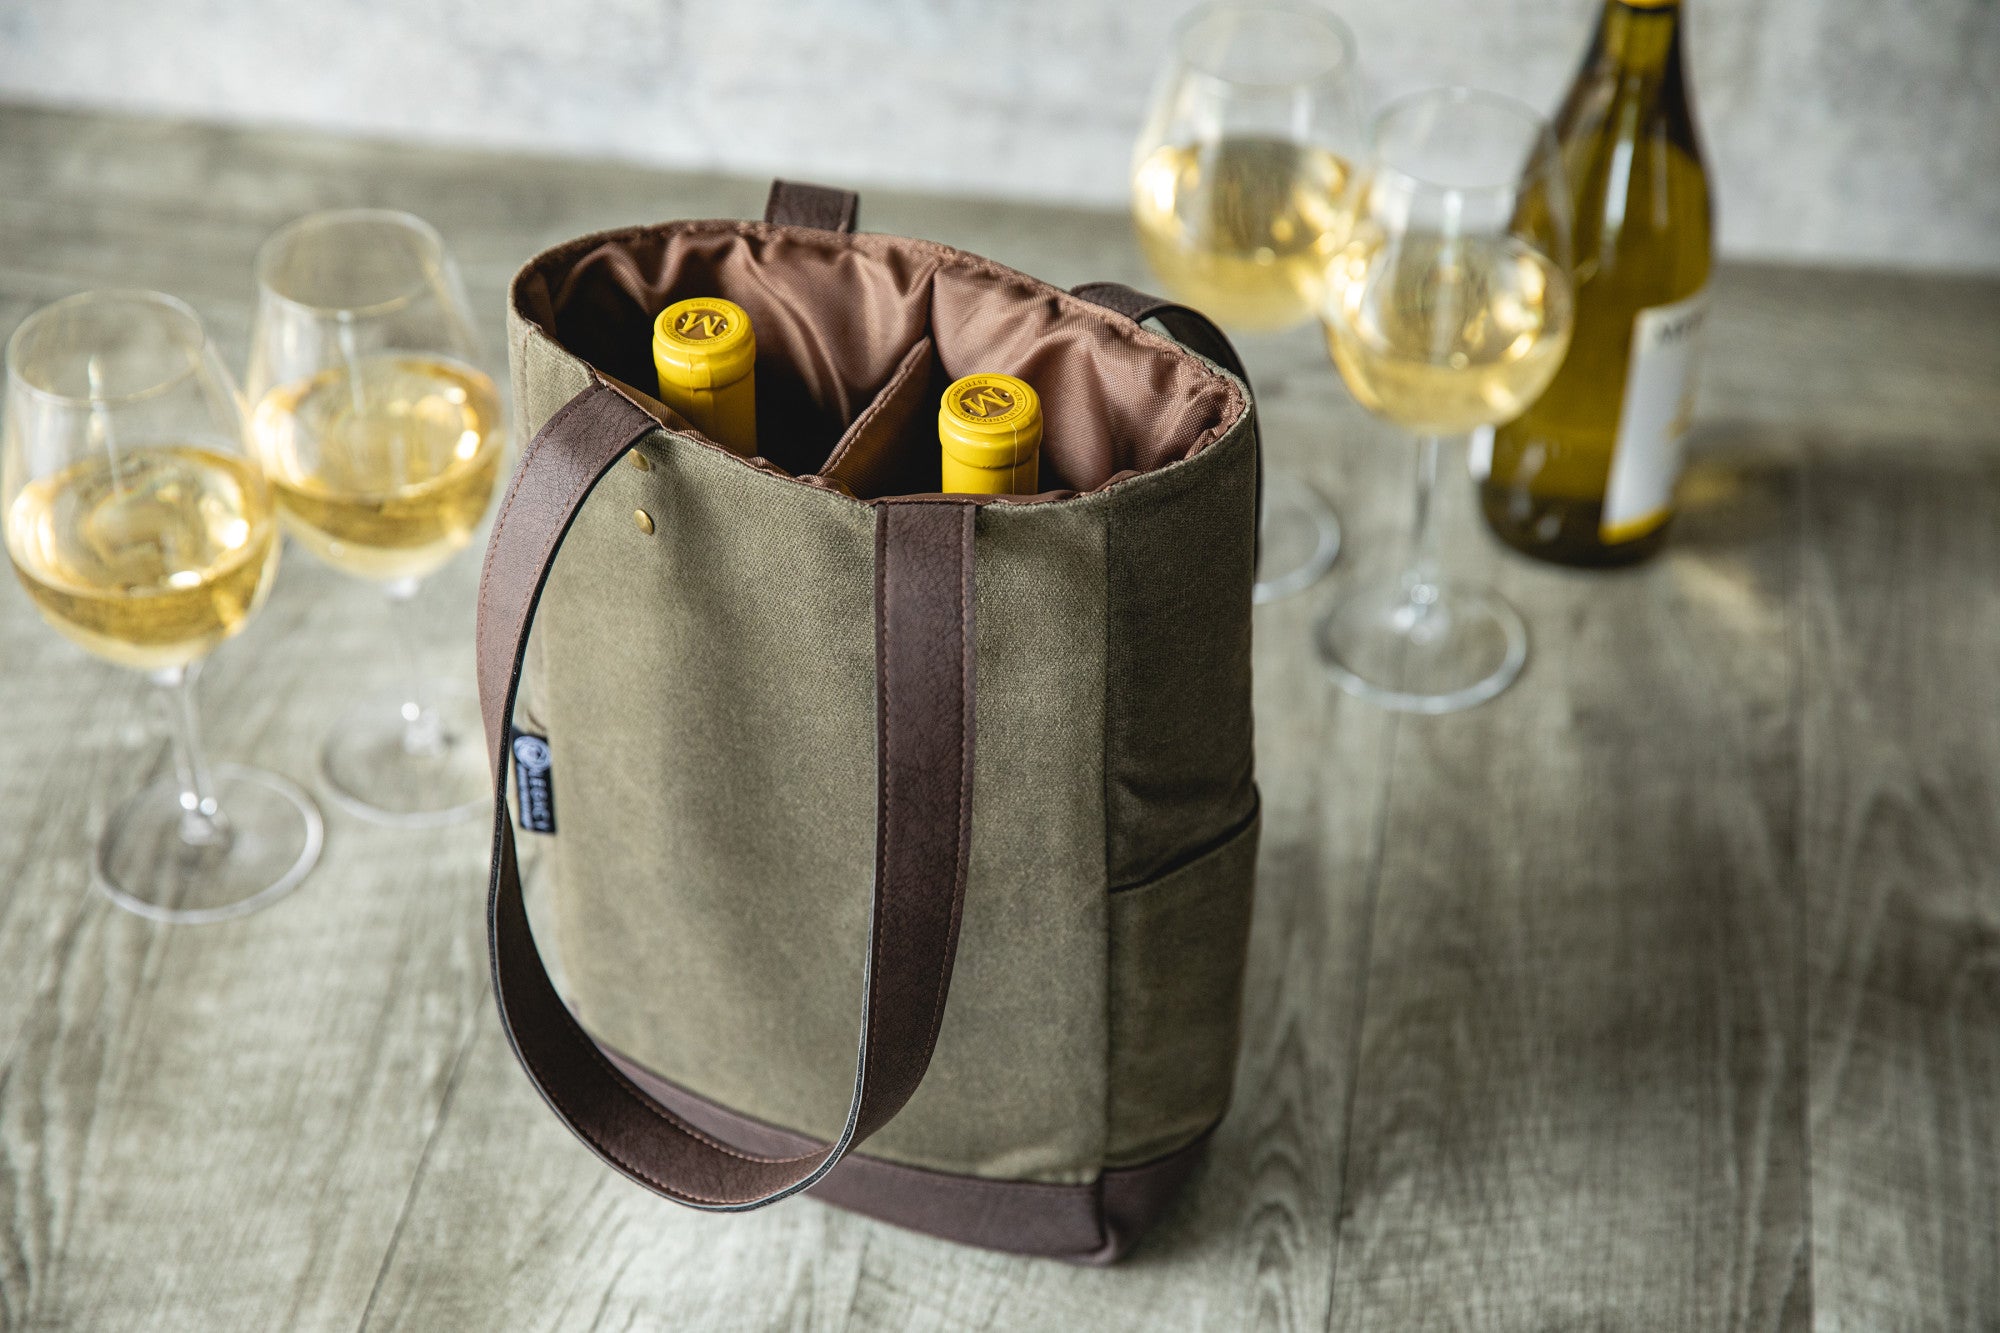 Mizzou Tigers - 2 Bottle Insulated Wine Cooler Bag